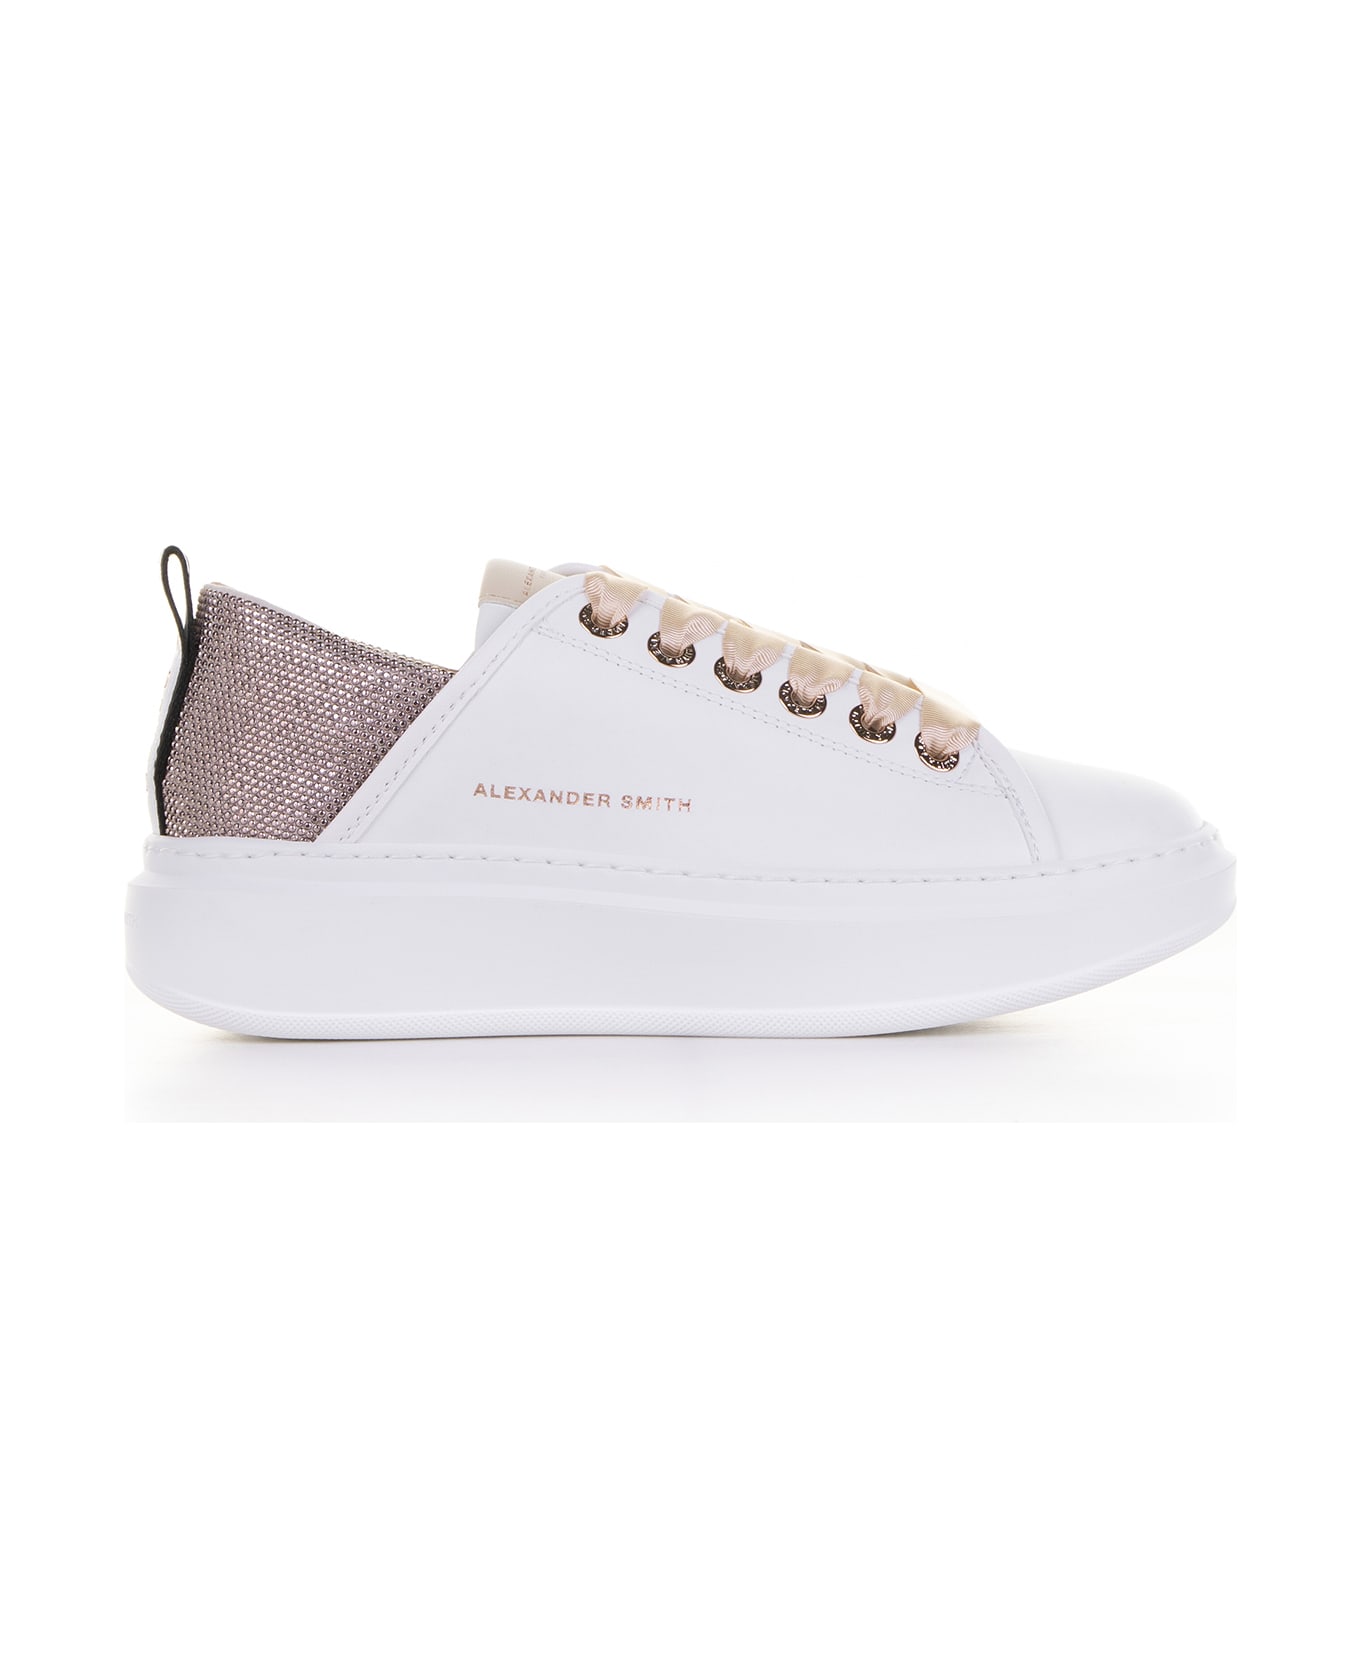 Alexander Smith London Wembley Sneaker In Leather And Rhinestones - WHITE BEIGE スニーカー